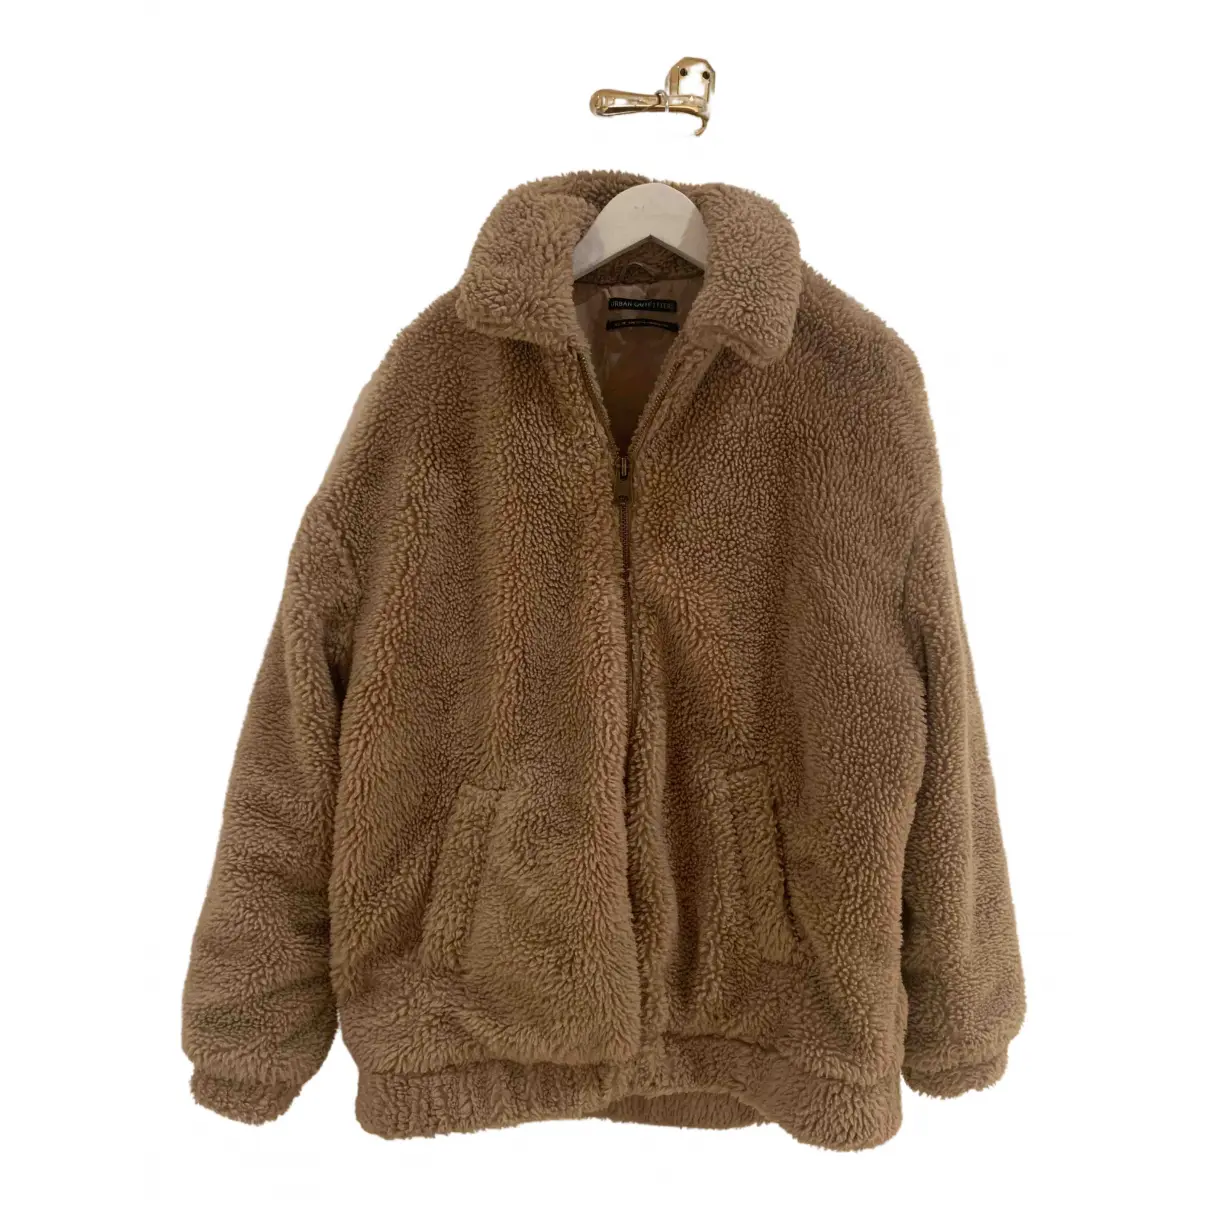 Coat Urban Outfitters